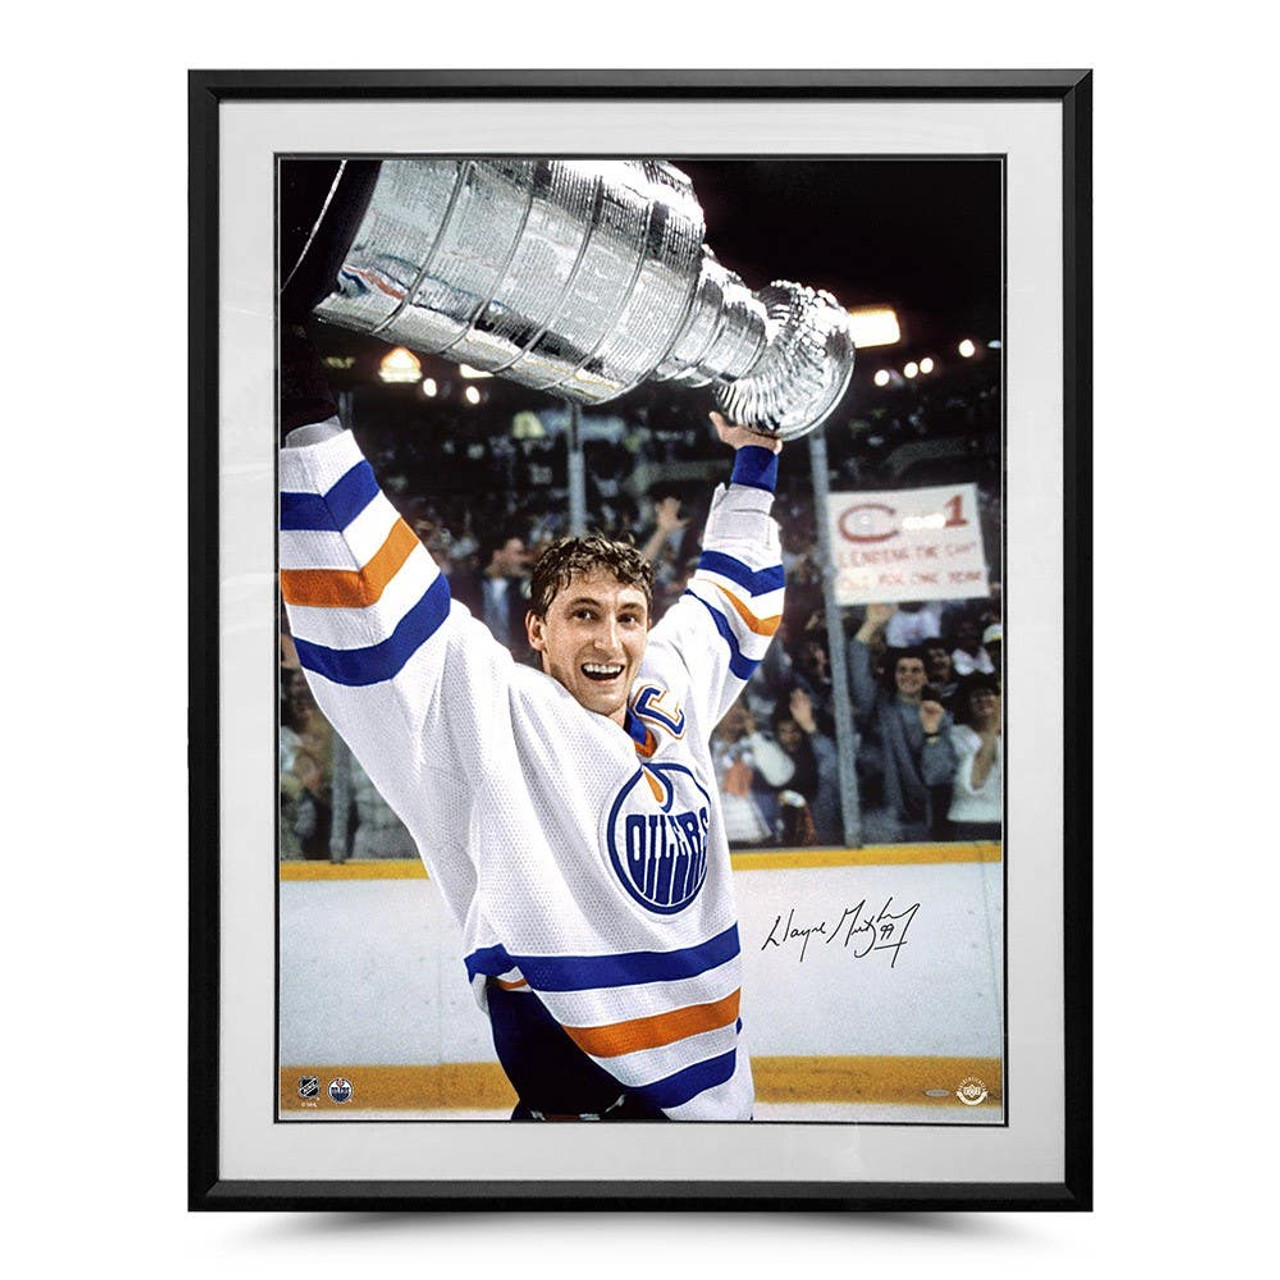 Wayne Gretzky Autographed One More Time Photo - Upper Deck